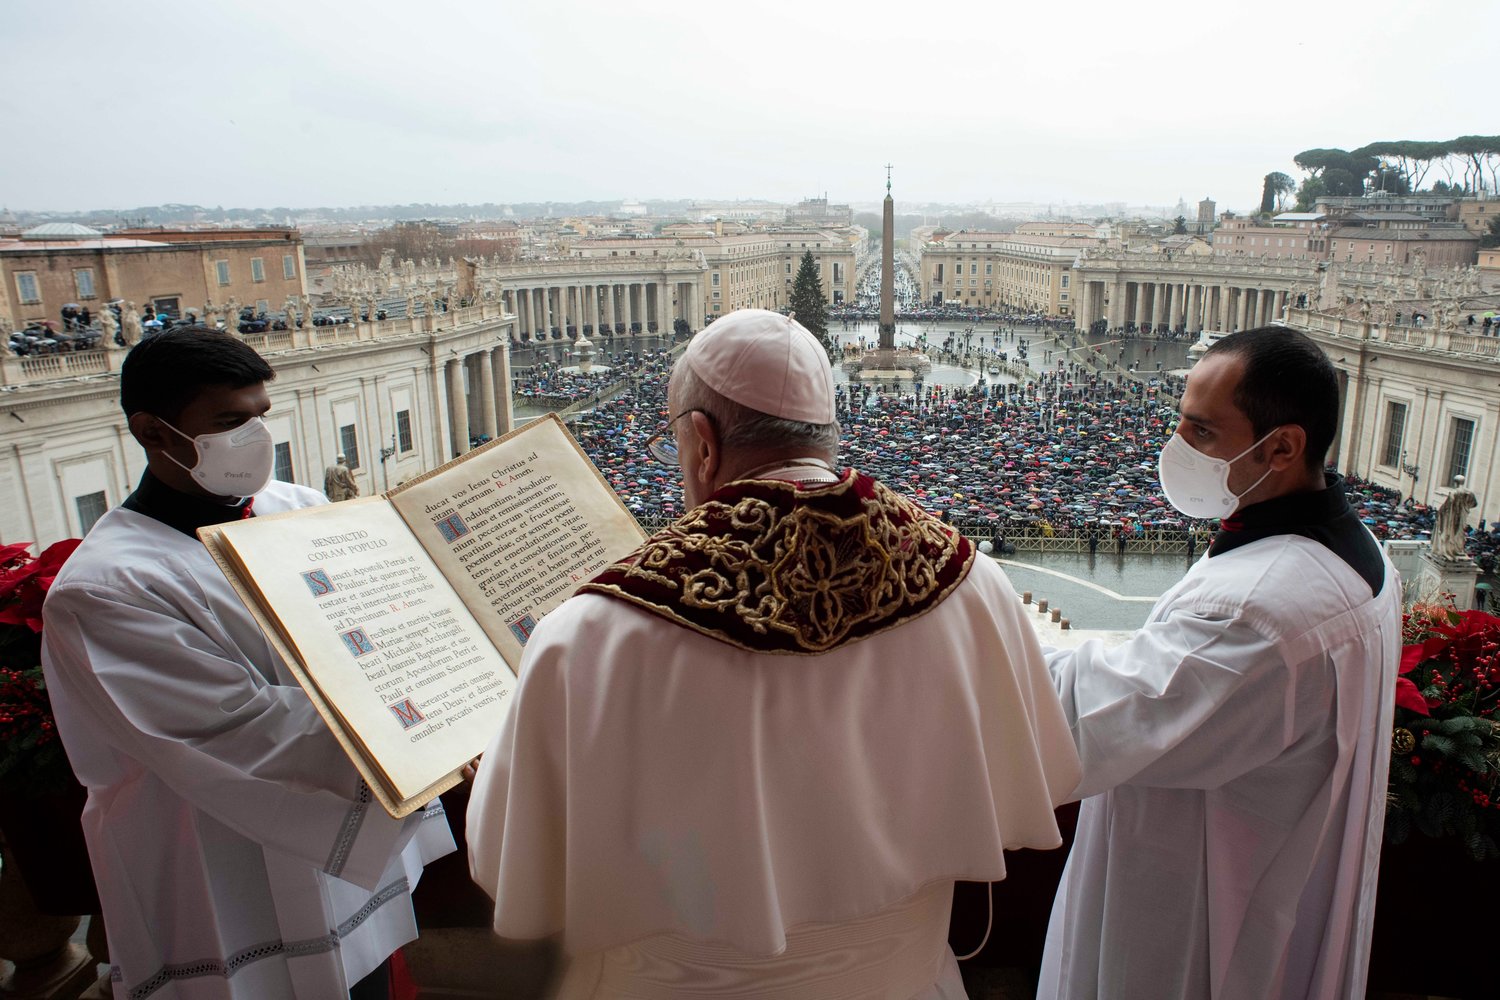 Pope Francis delivers Christmas blessing “urbi et orbi” (to the city and the world) from the central balcony of St. Peter’s Basilica at the Vatican Dec. 25.